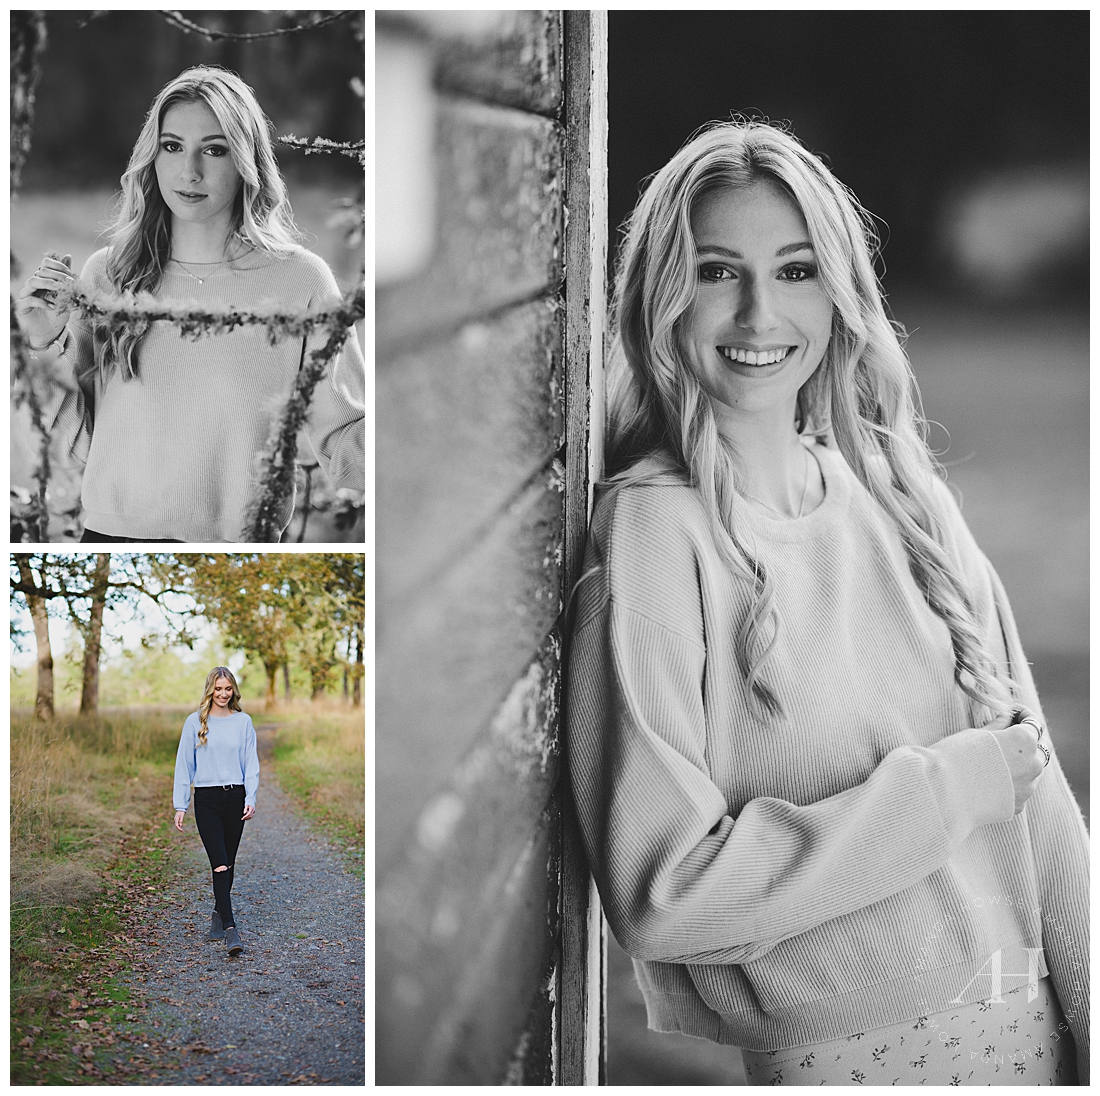 Fort Steilacoom Senior Portraits on the Trails | Rustic Outdoor Portraits in Washington, Poses for High School Senior Girls | Photographed by Amanda Howse Photography, Tacoma's Best Senior Photographer